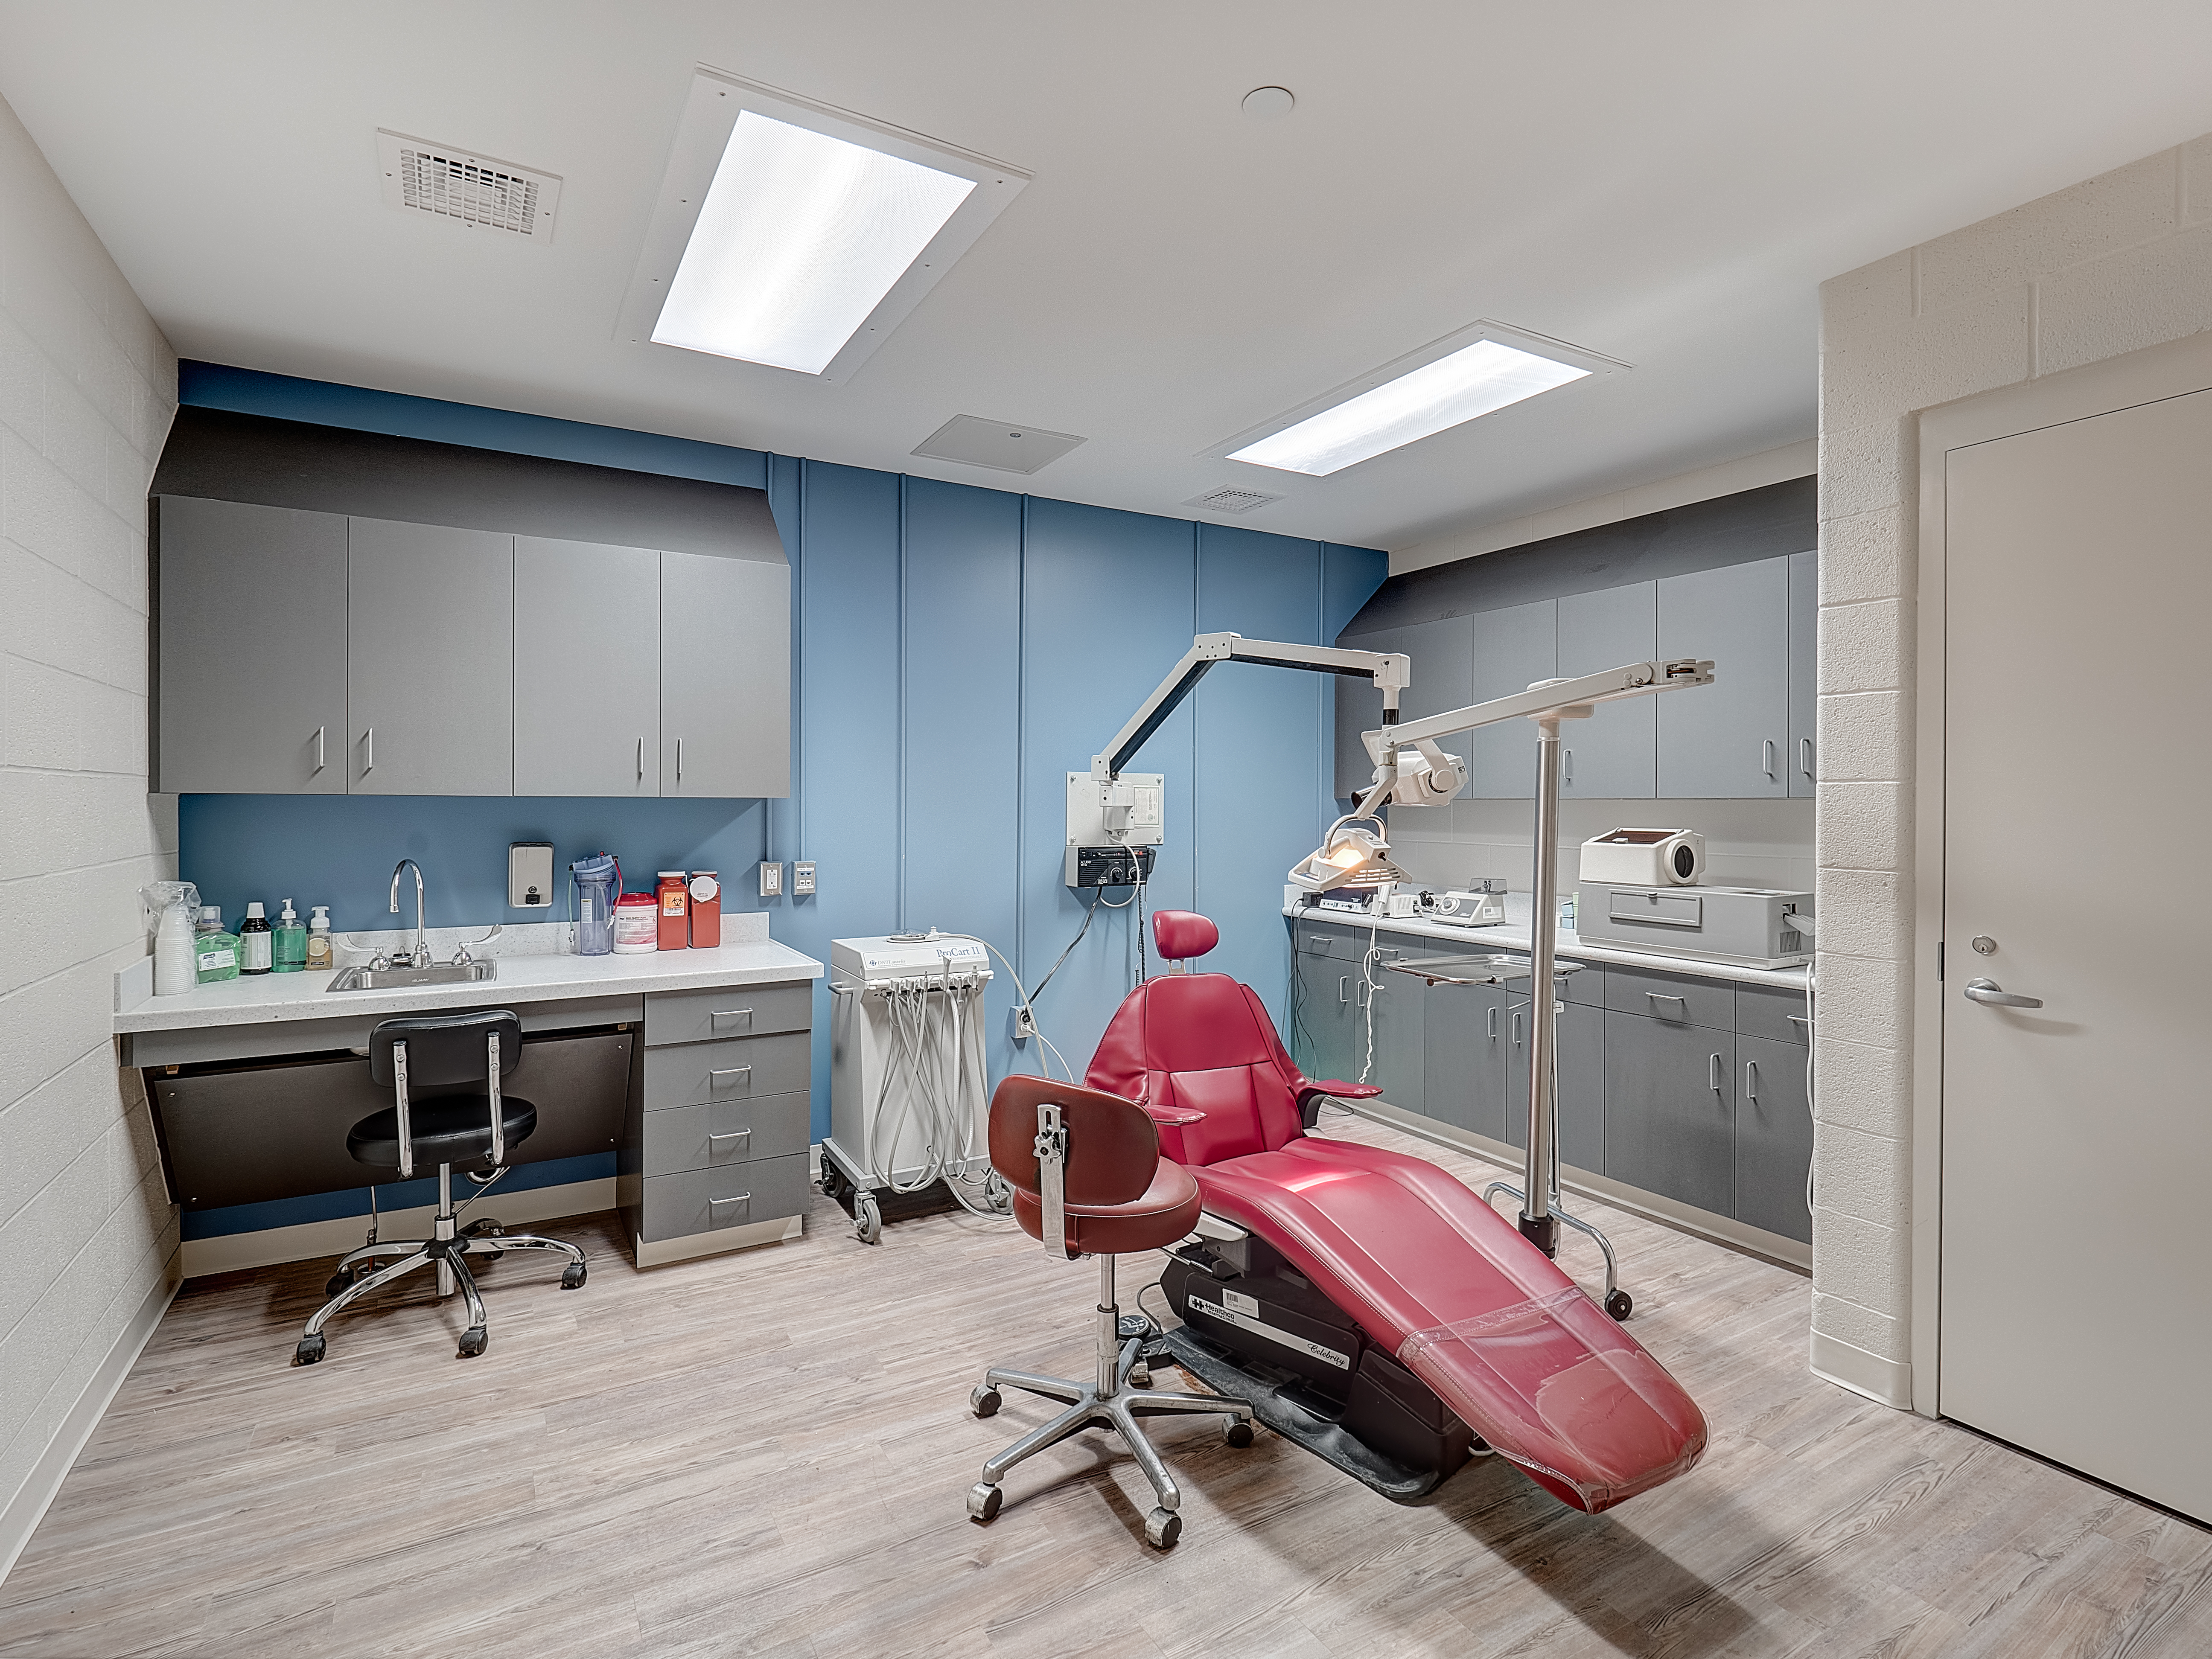 McLean County Law and Justice Center Dental